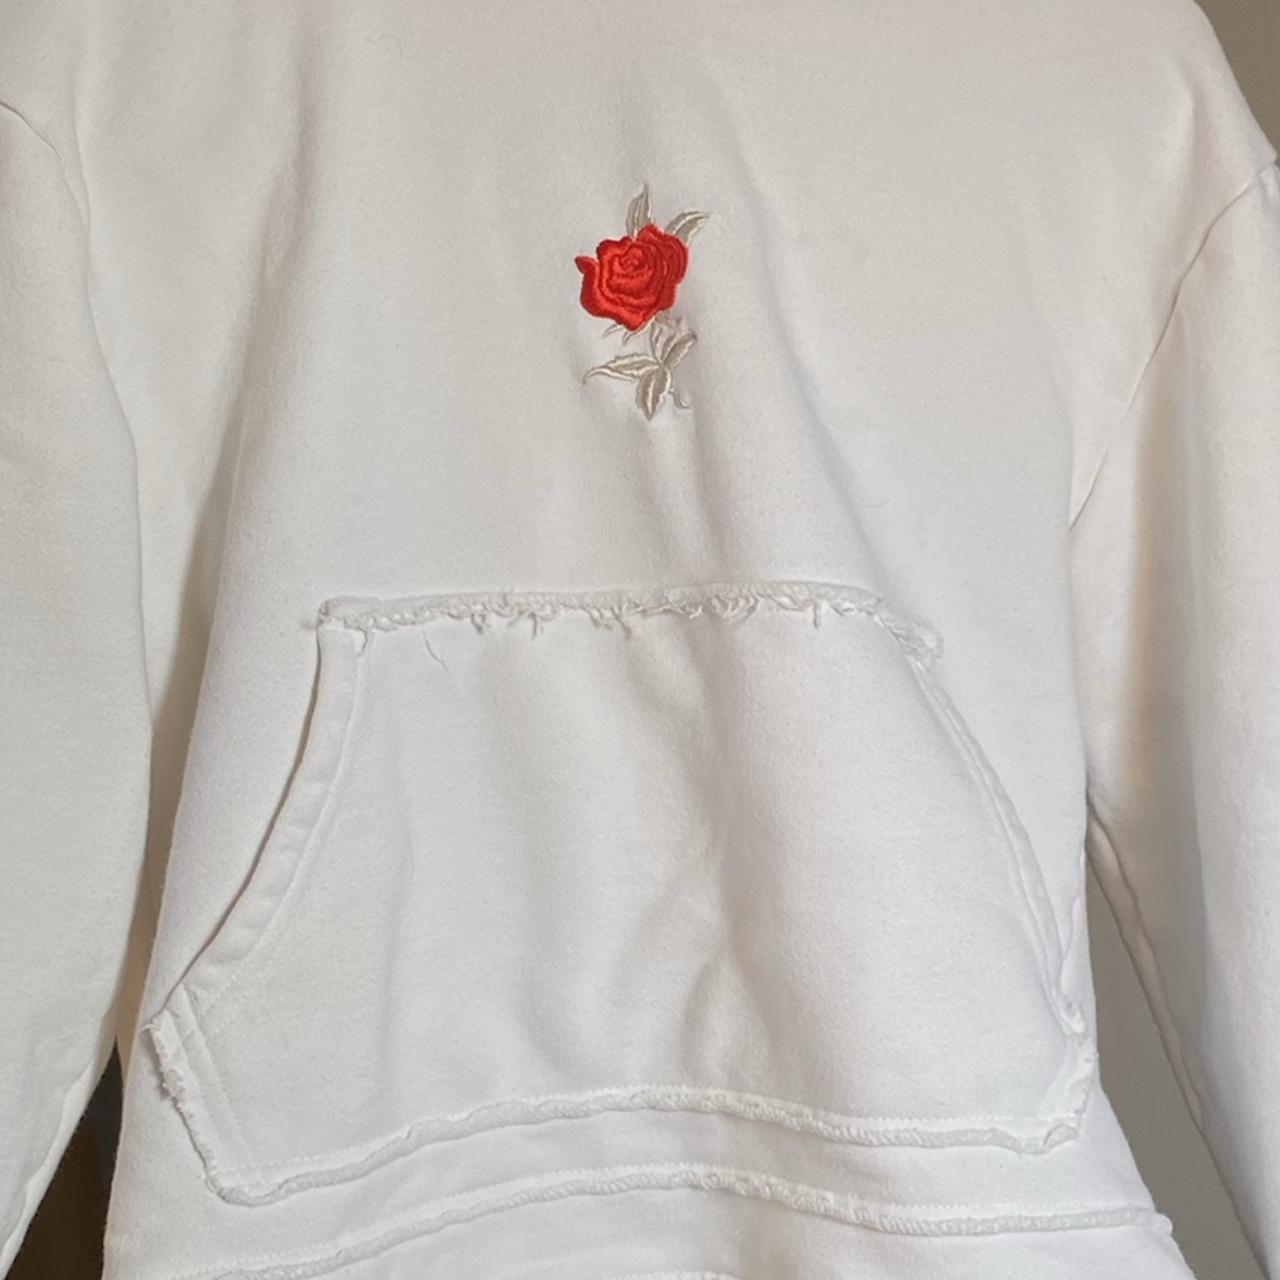 Maniere De Voir 🥀 Hoodie with Rose Embroidery Fits... - Depop